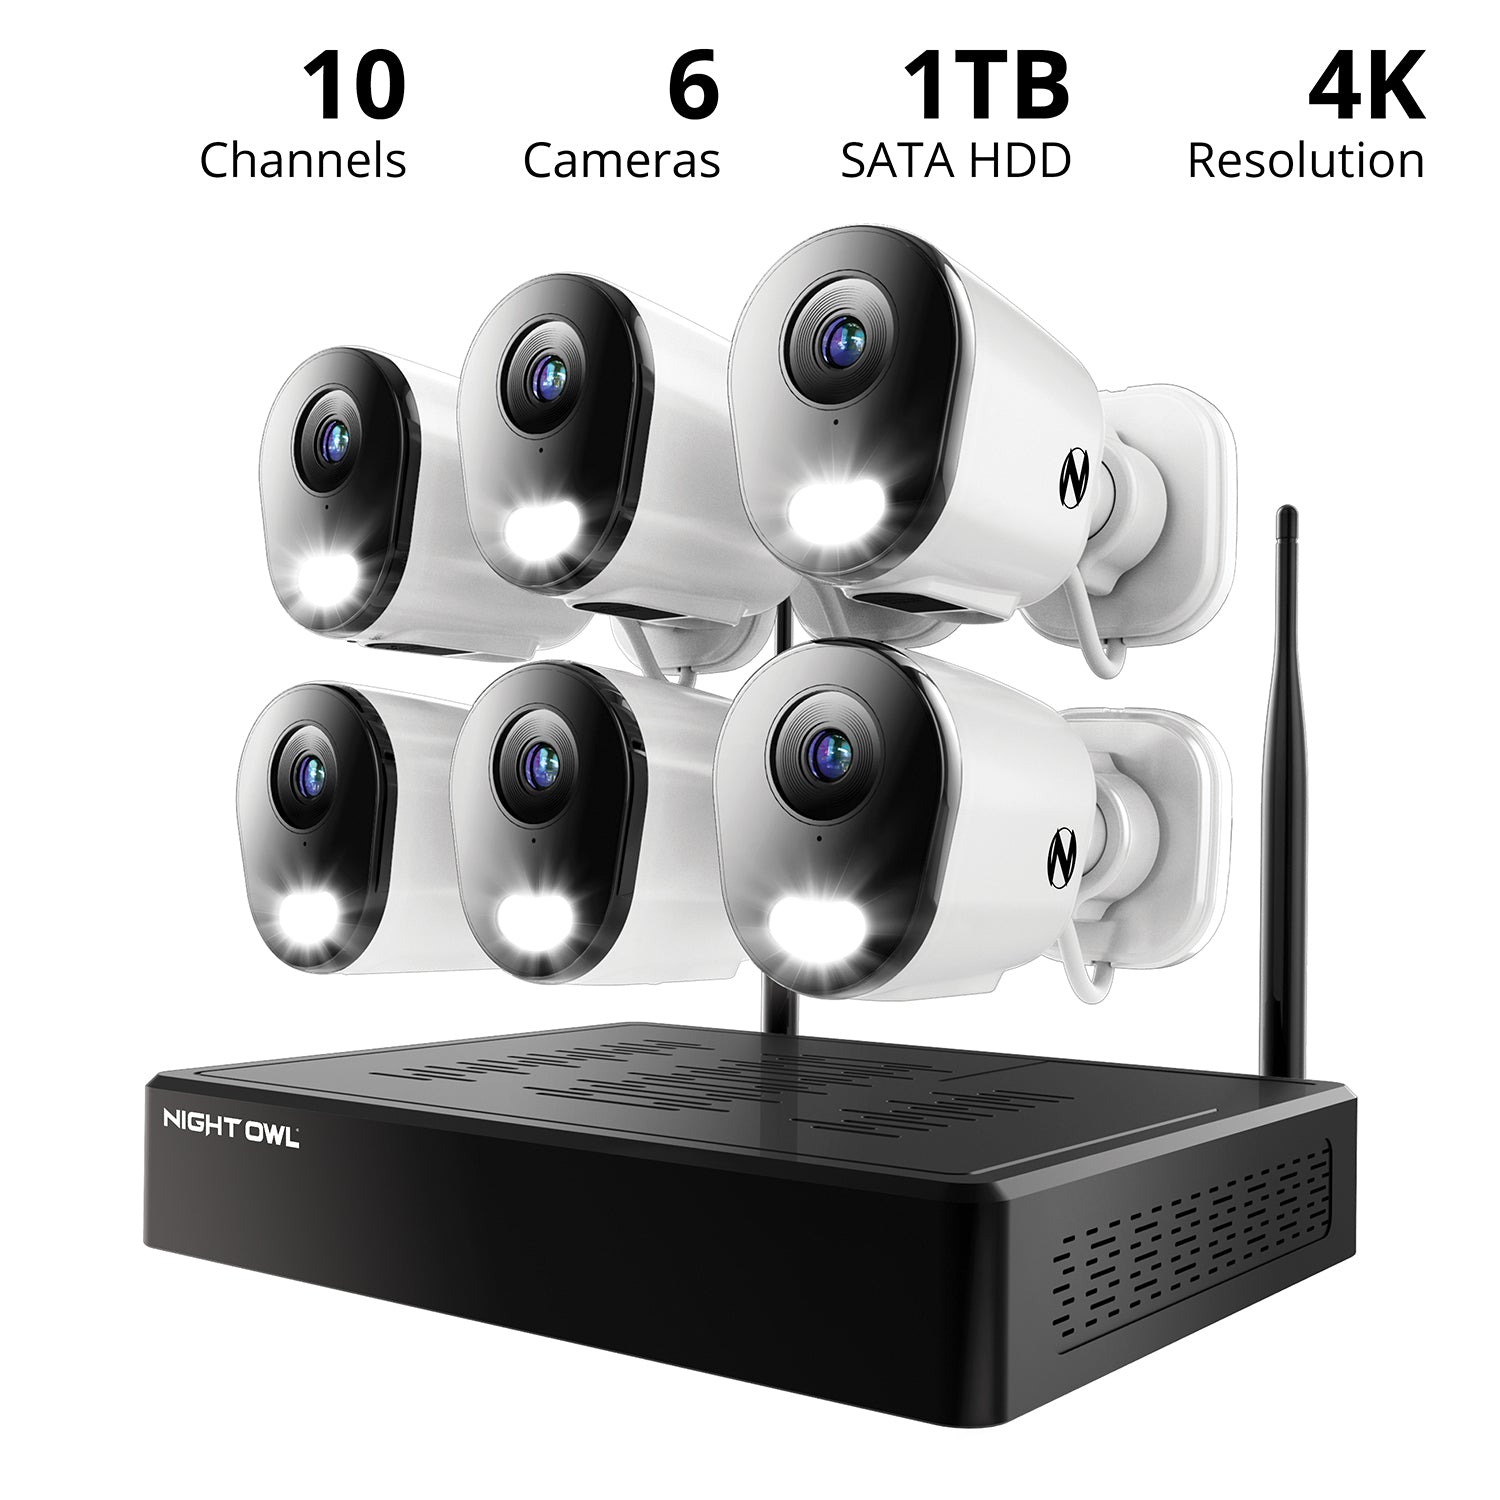 10 Channel 4K Wi-Fi NVR Security System with 1TB Hard Drive and 6